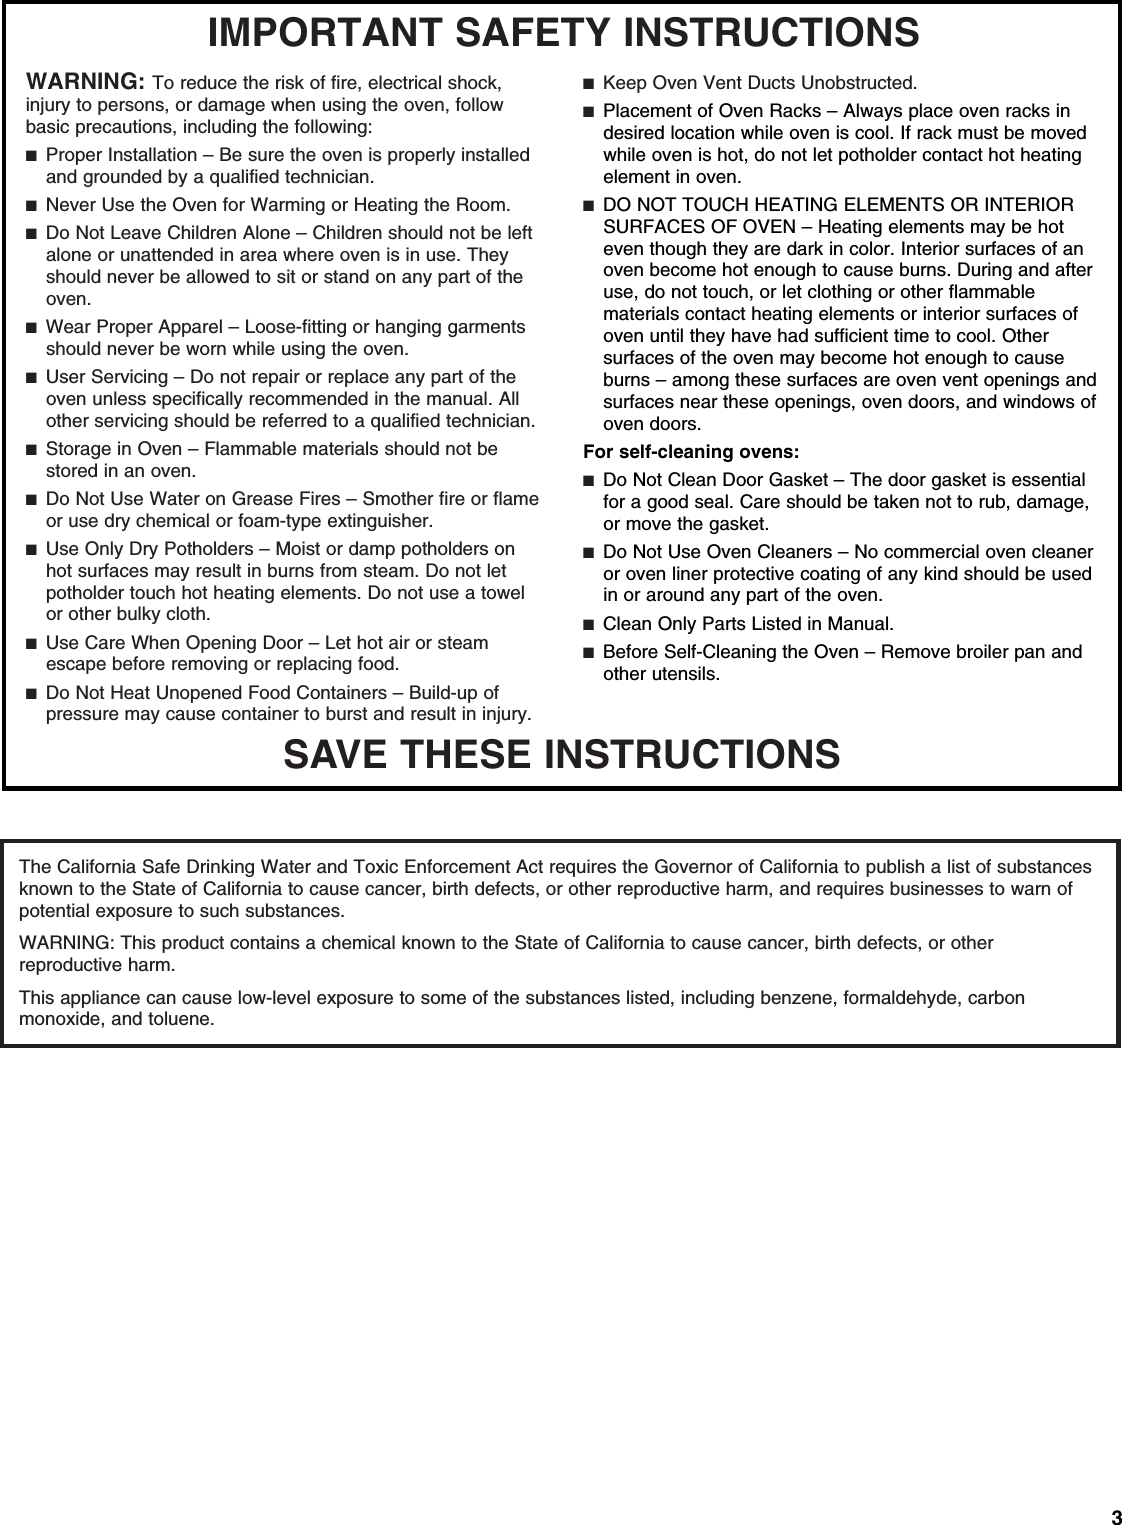 3SAVE THESE INSTRUCTIONSIMPORTANT SAFETY INSTRUCTIONSWARNING:To reduce the risk of fire, electrical shock,injury to persons, or damage when using the oven, followbasic precautions, including the following:■  Proper Installation –Be sure the oven is properly installedand grounded by a qualified technician.■  Never Use the Oven for Warming or Heating the Room.■  Do Not Leave Children Alone –Children should not be leftalone or unattended in area where oven is in use. Theyshould never be allowed to sit or stand on any part of theoven.■  Wear Proper Apparel –Loose-fitting or hanging garmentsshould never be worn while using the oven.■  User Servicing –Do not repair or replace any part of theoven unless specifically recommended in the manual. Allother servicing should be referred to a qualified technician.■  Storage in Oven –Flammable materials should not bestored in an oven.■  Do Not Use Water on Grease Fires –Smother fire or flameor use dry chemical or foam-type extinguisher.■  Use Only Dry Potholders –Moist or damp potholders onhot surfaces may result in burns from steam. Do not letpotholder touch hot heating elements. Do not use a towelor other bulky cloth.■  Use Care When Opening Door –Let hot air or steamescape before removing or replacing food.■  Do Not Heat Unopened Food Containers –Build-up ofpressure may cause container to burst and result in injury.■  Keep Oven Vent Ducts Unobstructed.■  Placement of Oven Racks –Always place oven racks indesired location while oven is cool. If rack must be movedwhile oven is hot, do not let potholder contact hot heatingelement in oven.■  DO NOT TOUCH HEATING ELEMENTS OR INTERIORSURFACES OF OVEN –Heating elements may be hoteven though they are dark in color. Interior surfaces of anoven become hot enough to cause burns. During and afteruse, do not touch, or let clothing or other flammablematerials contact heating elements or interior surfaces ofoven until they have had sufficient time to cool. Othersurfaces of the oven may become hot enough to causeburns –among these surfaces are oven vent openings andsurfaces near these openings, oven doors, and windows ofoven doors.For self-cleaning ovens:■  Do Not Clean Door Gasket –The door gasket is essentialfor a good seal. Care should be taken not to rub, damage,or move the gasket.■  Do Not Use Oven Cleaners –No commercial oven cleaneror oven liner protective coating of any kind should be usedin or around any part of the oven.■  Clean Only Parts Listed in Manual.■  Before Self-Cleaning the Oven –Remove broiler pan andother utensils.The California Safe Drinking Water and Toxic Enforcement Act requires the Governor of California to publish a list of substances known to the State of California to cause cancer, birth defects, or other reproductive harm, and requires businesses to warn of potential exposure to such substances.WARNING: This product contains a chemical known to the State of California to cause cancer, birth defects, or other reproductive harm.This appliance can cause low-level exposure to some of the substances listed, including benzene, formaldehyde, carbon monoxide, and toluene.  